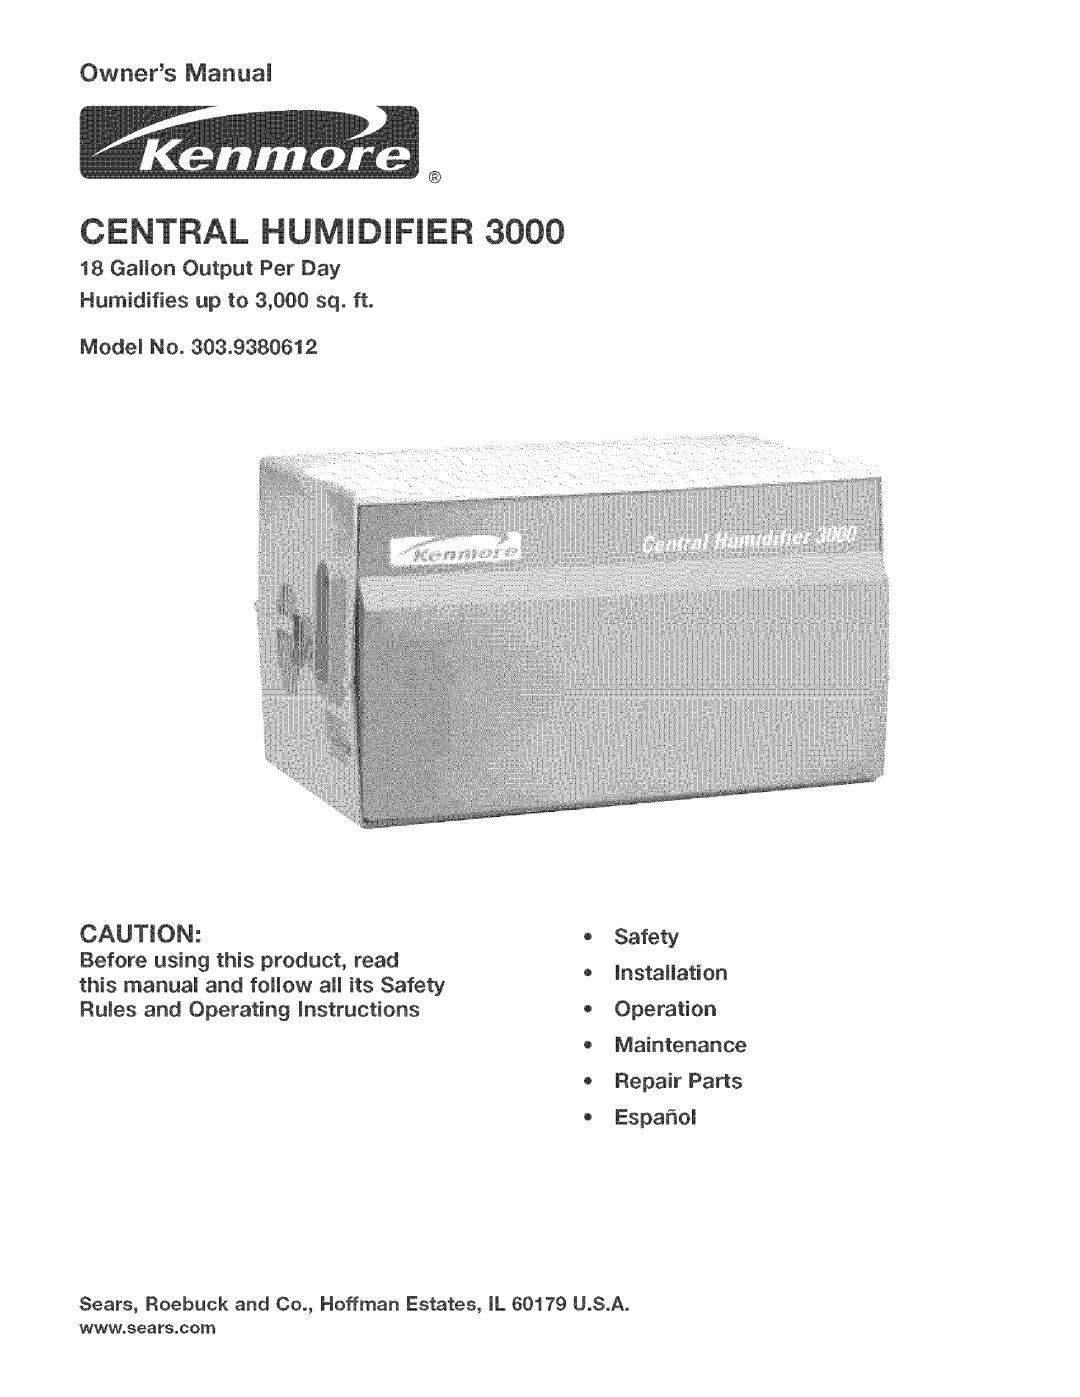 Kenmore 303.9380612 manual CENTRAL HUMiDiFiER, GammonOutput Per Day, Humidifies up to 3,000 sq. ft Modem No, o Safety 